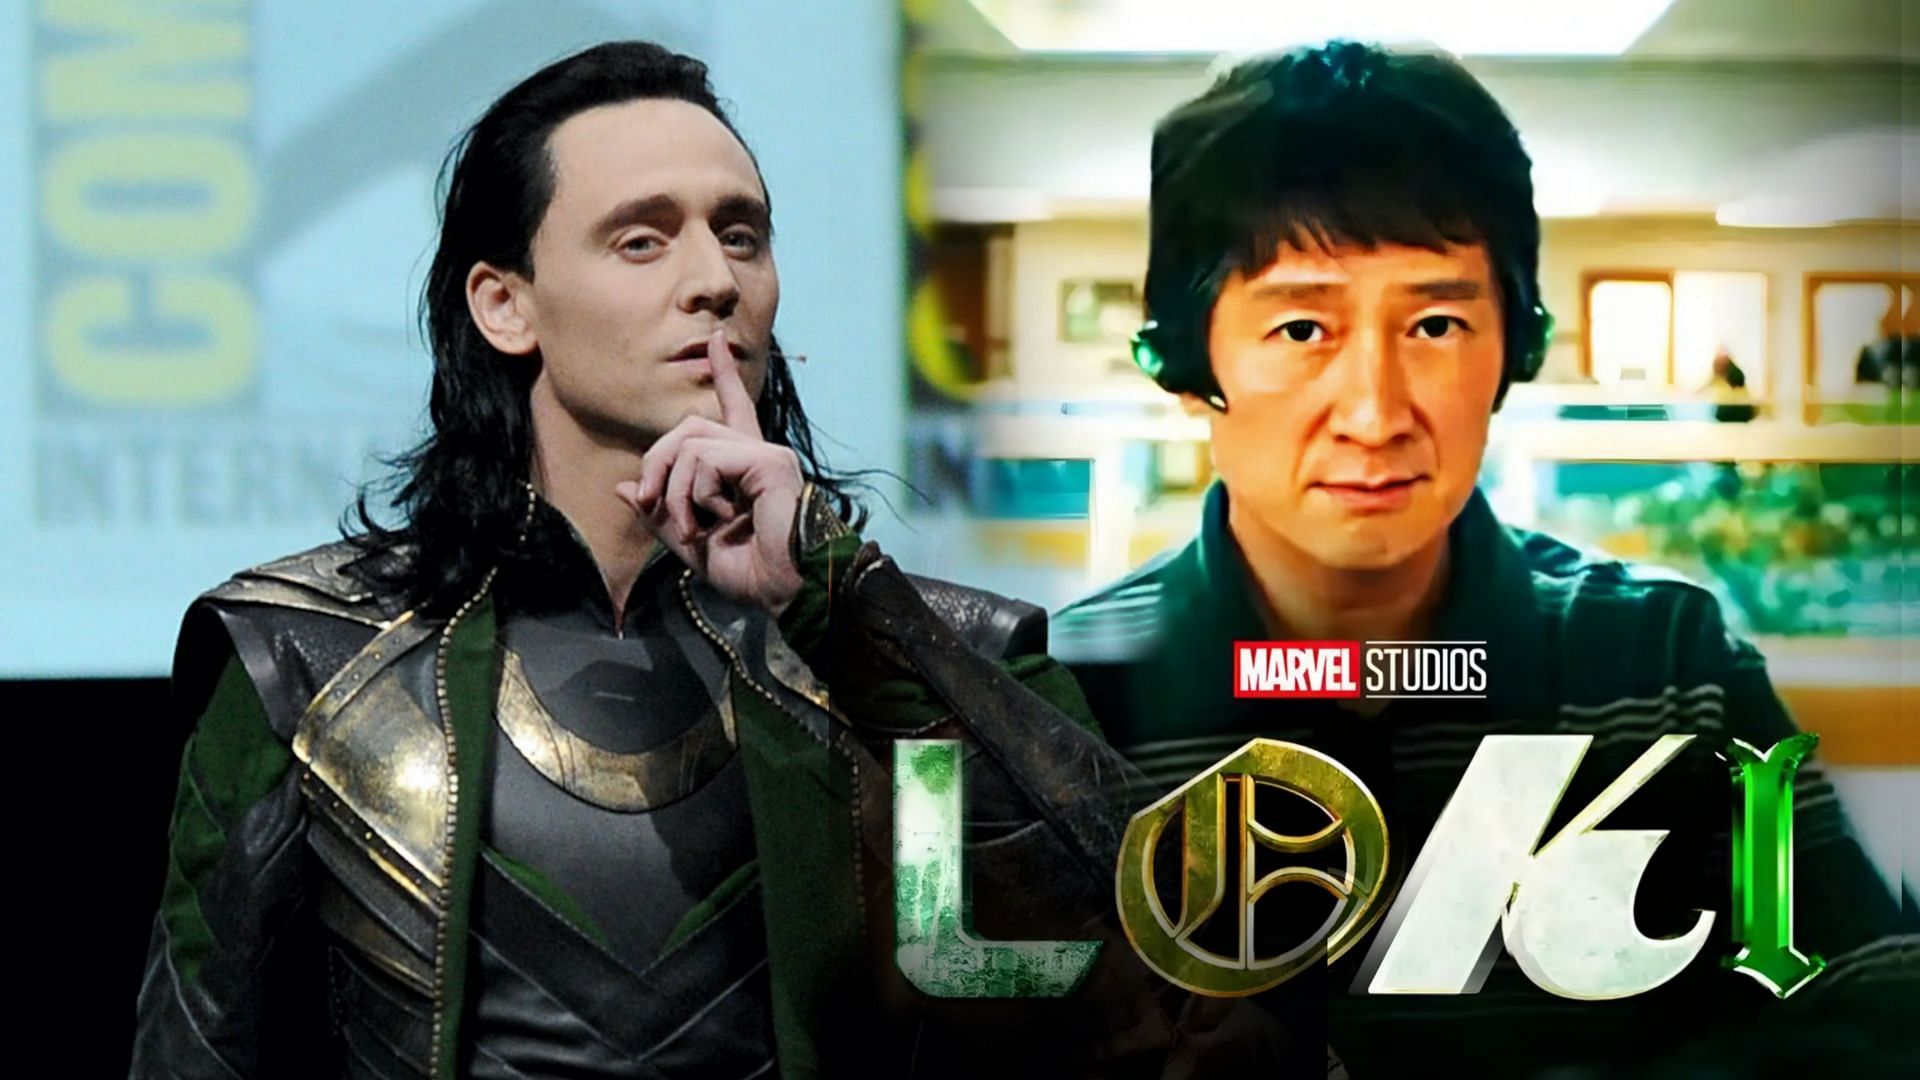 Loki' Season 2 - Trailer, Release Date, Cast, and Everything We Know